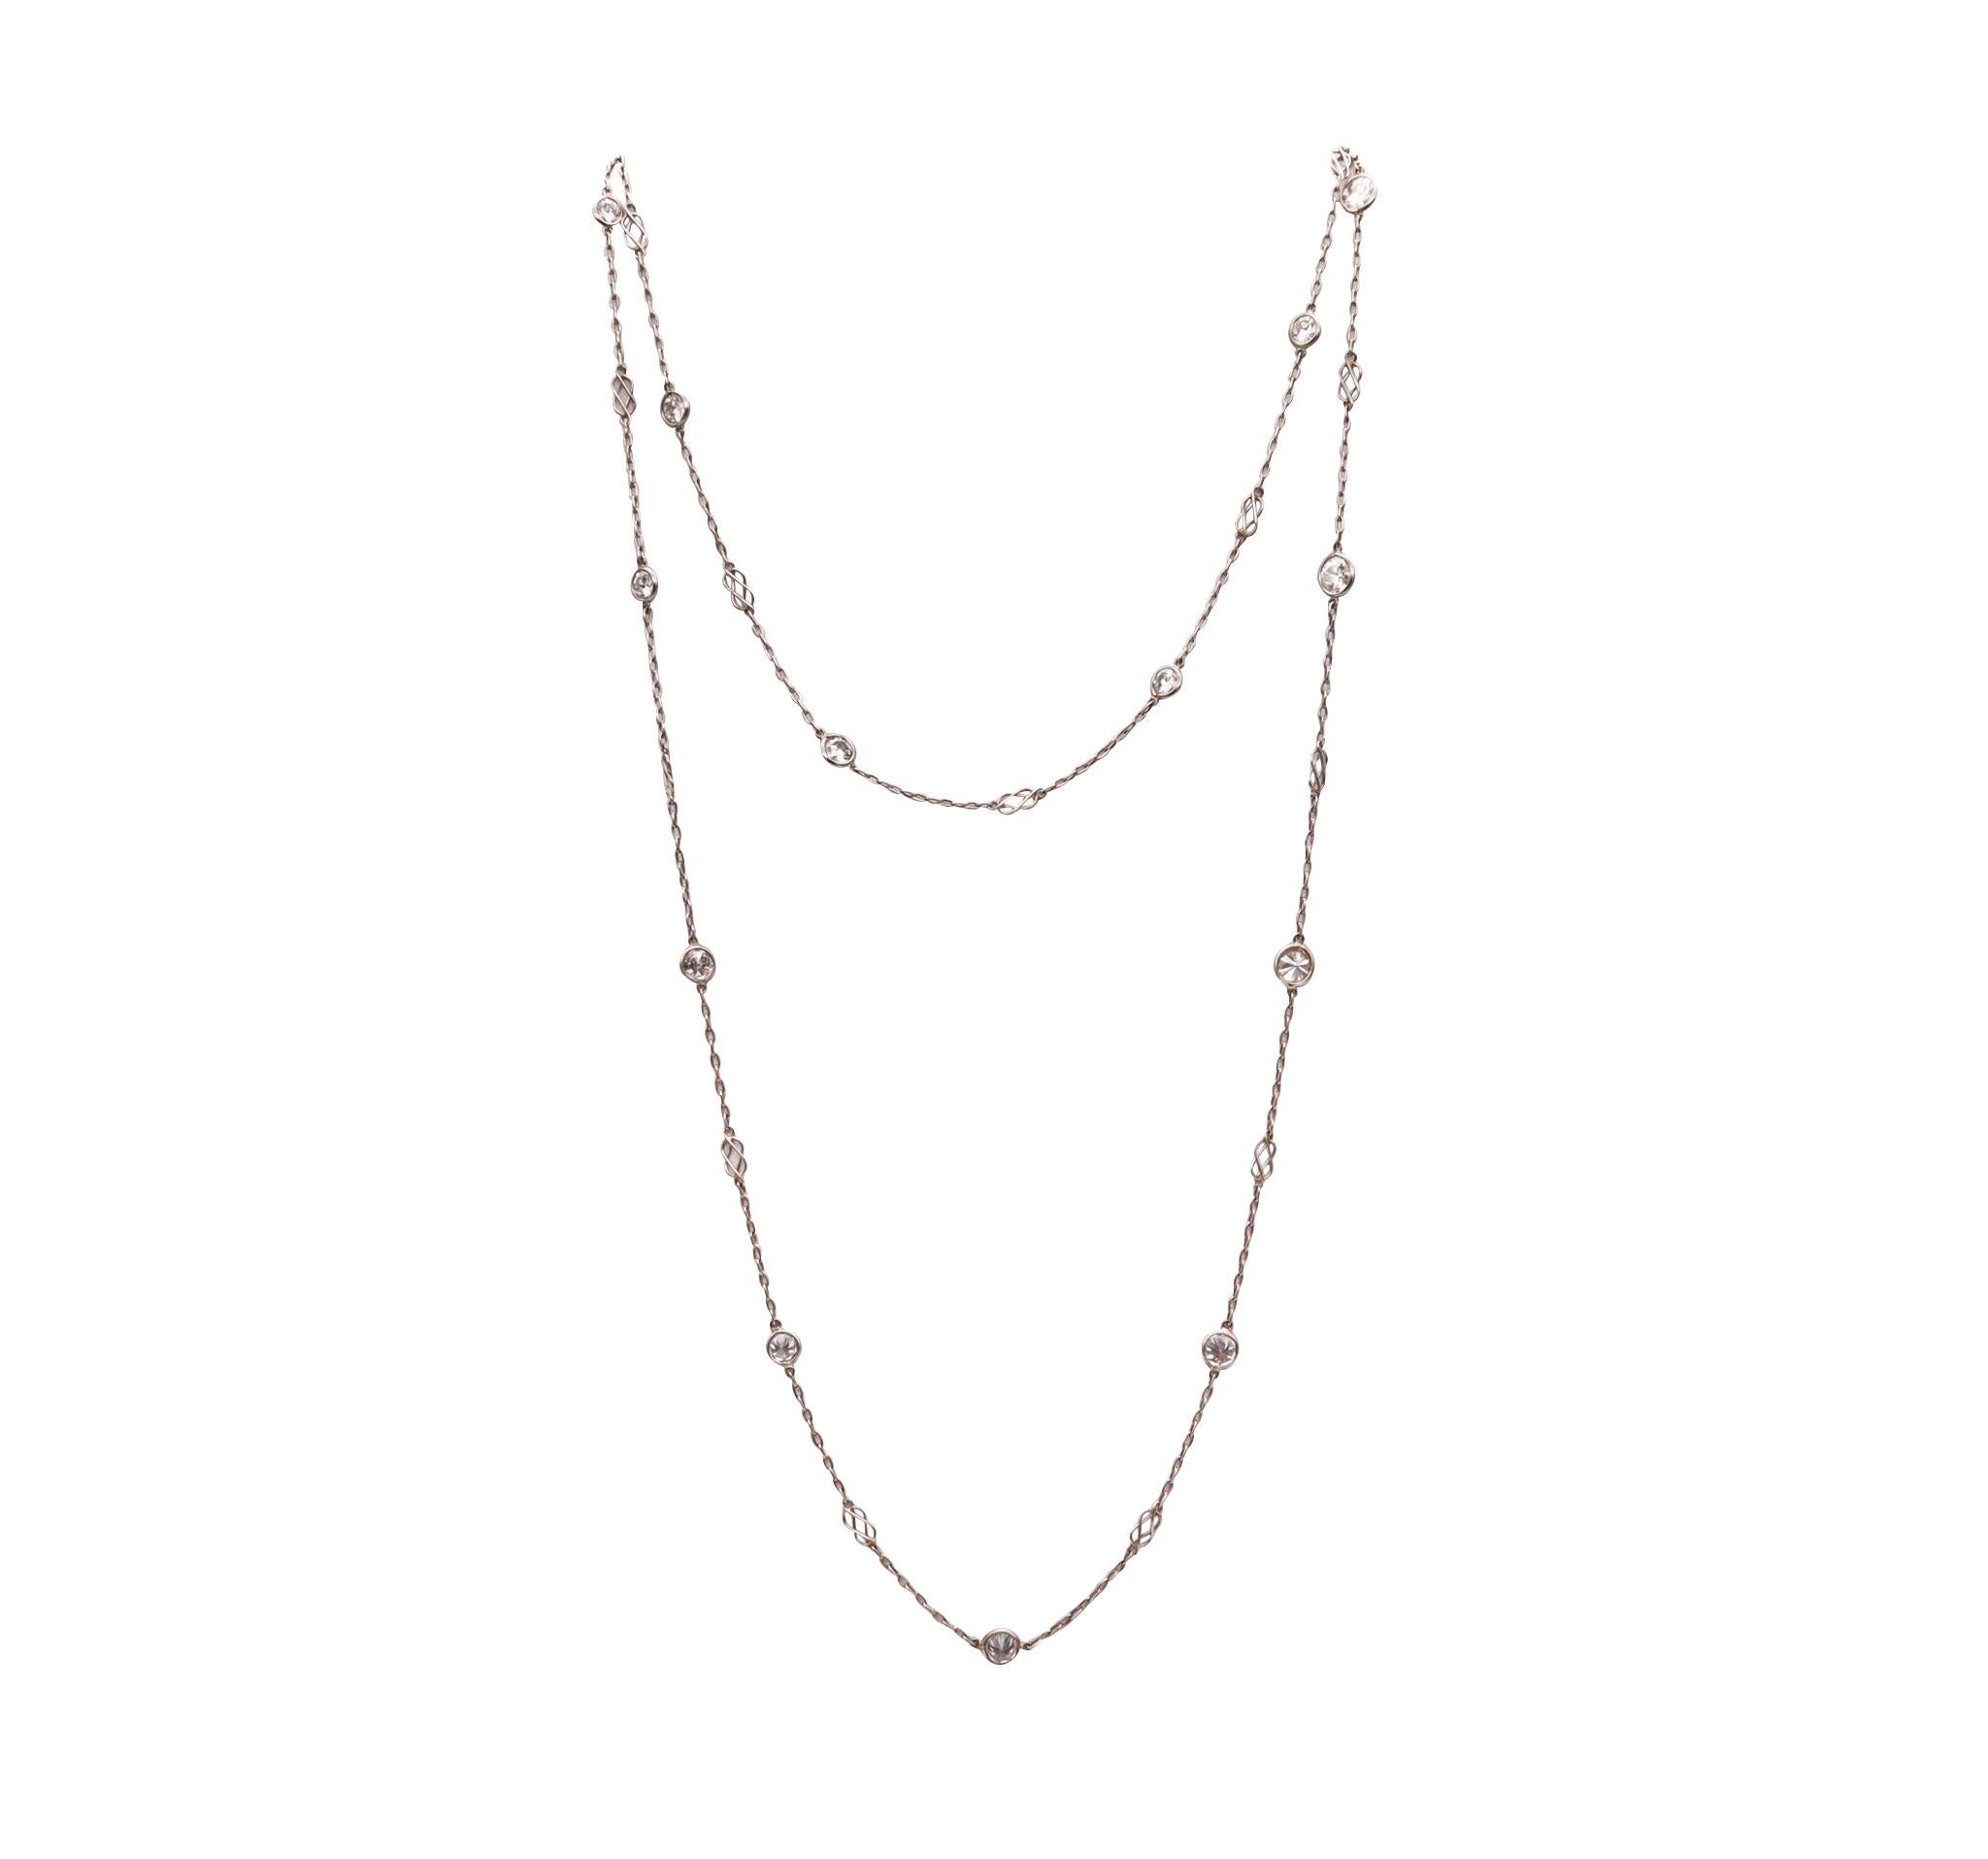 Art-Deco diamonds stations long chained necklace sautoir

A classic piece from the American art-deco period, created at the beginnings of the 1930's. It was carefully crafted in solid .950/.999 platinum and designed as a long chained sautoir, with